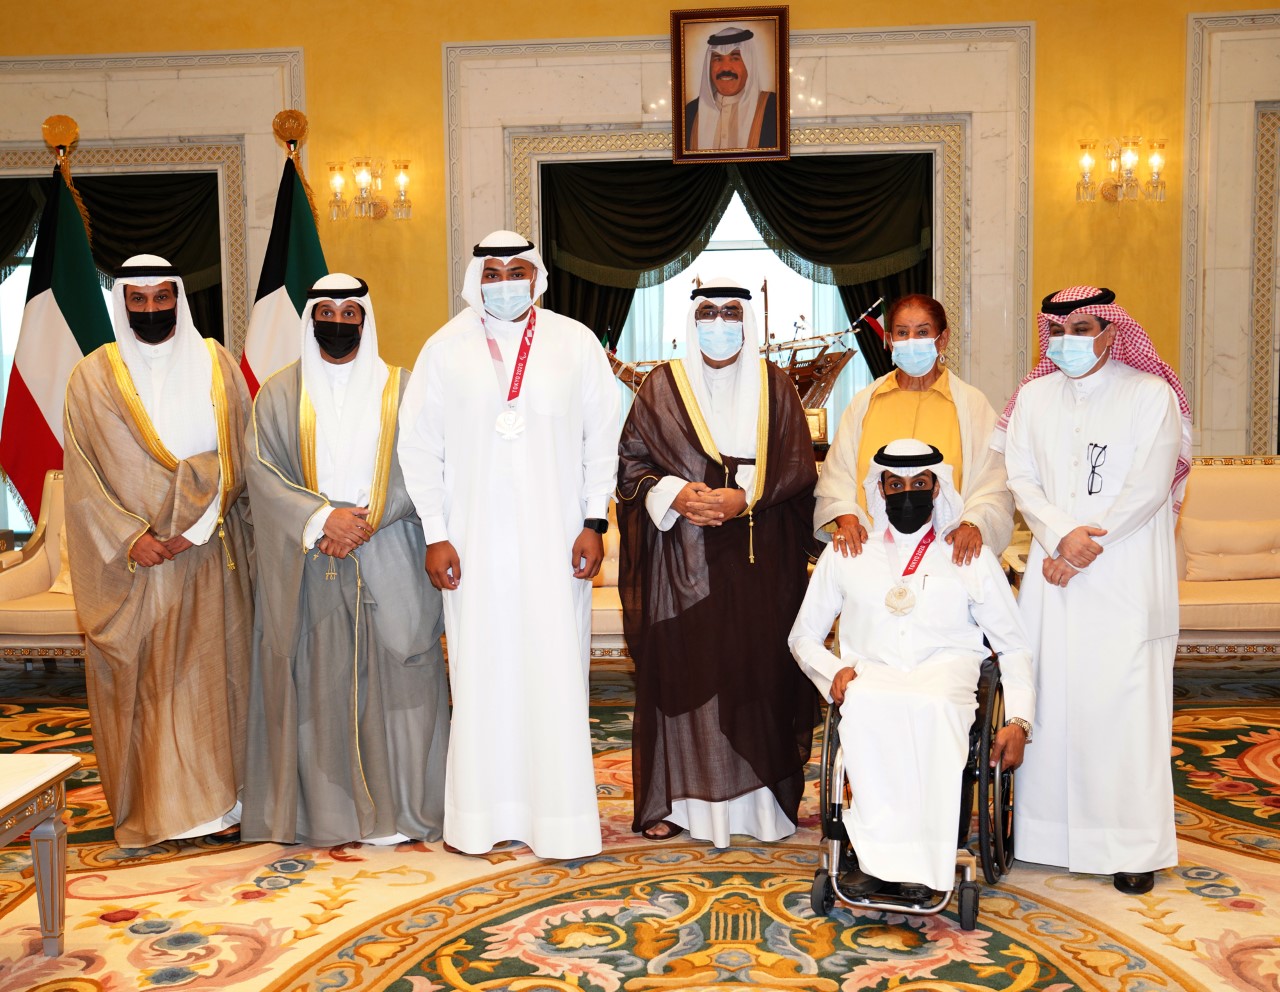 HH the Crown Prince received Minister of Information and winners in the 2020 Tokyo Paralympics Ahmad Al-Mutairi and Faisal Suror